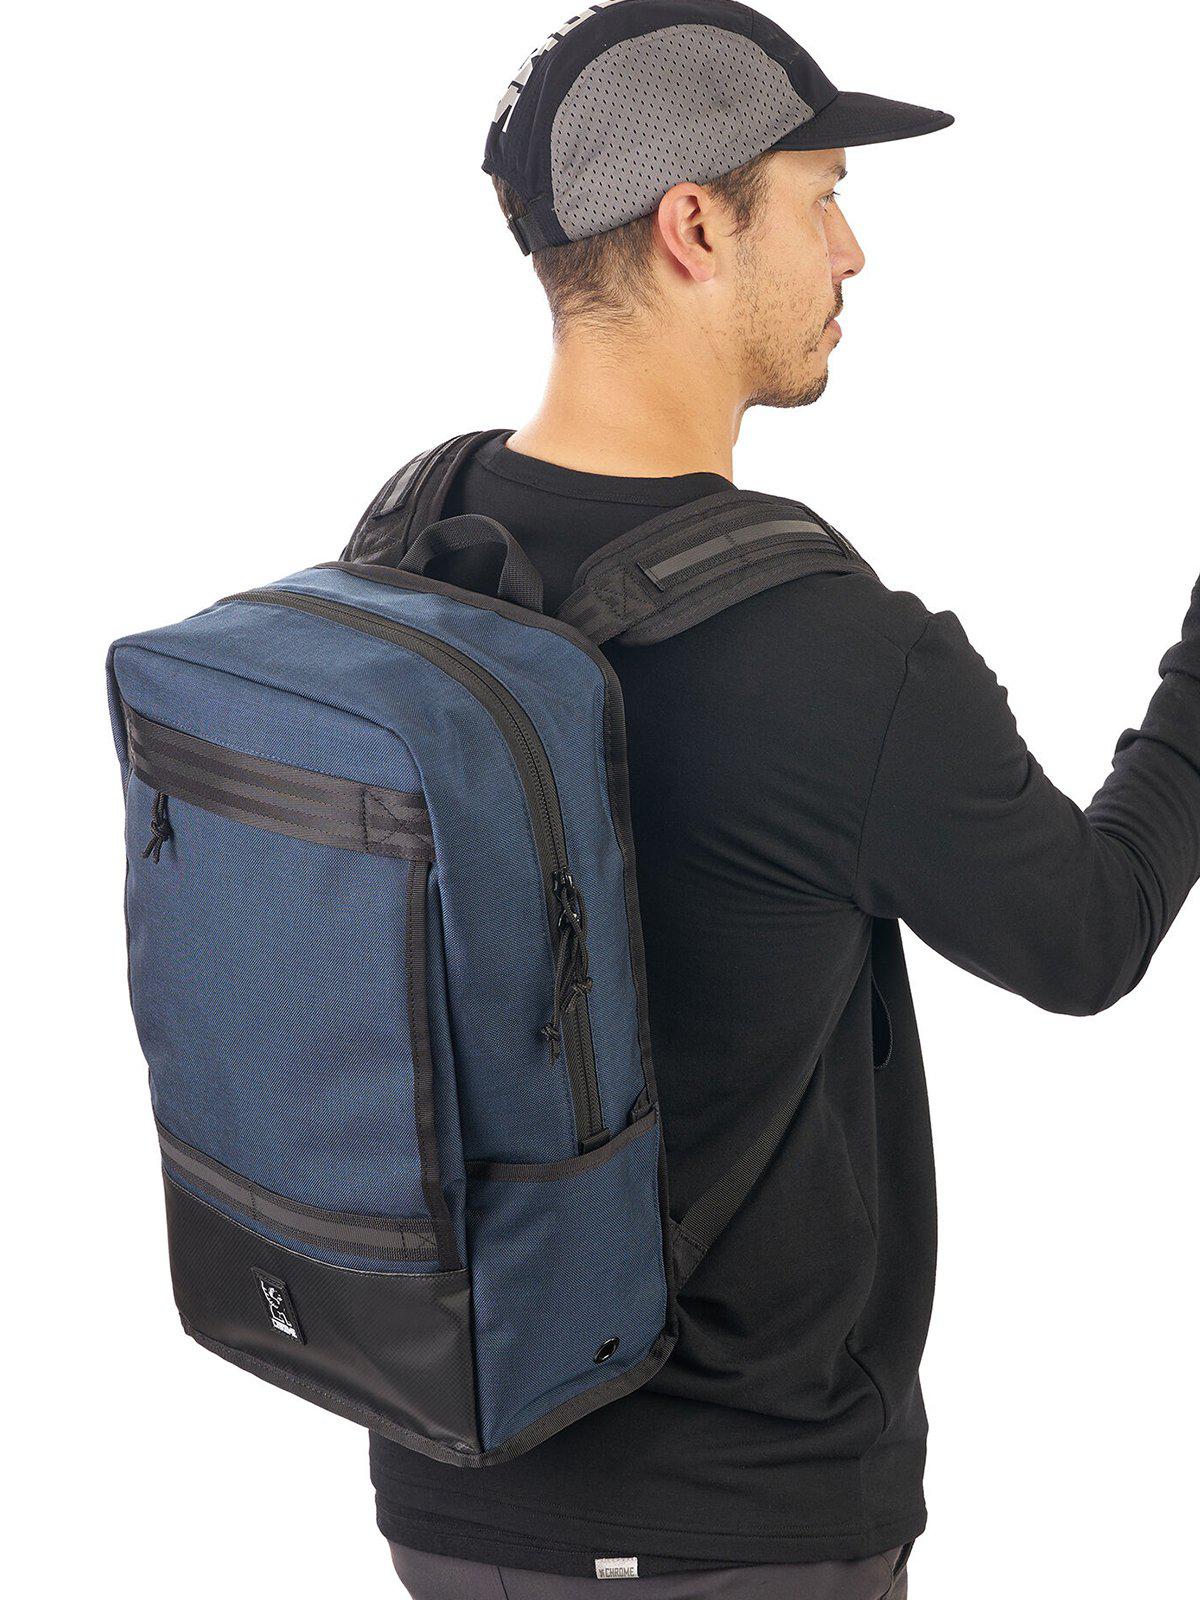 Chrome Industries Hondo Backpack All Black - MORE by Morello Indonesia